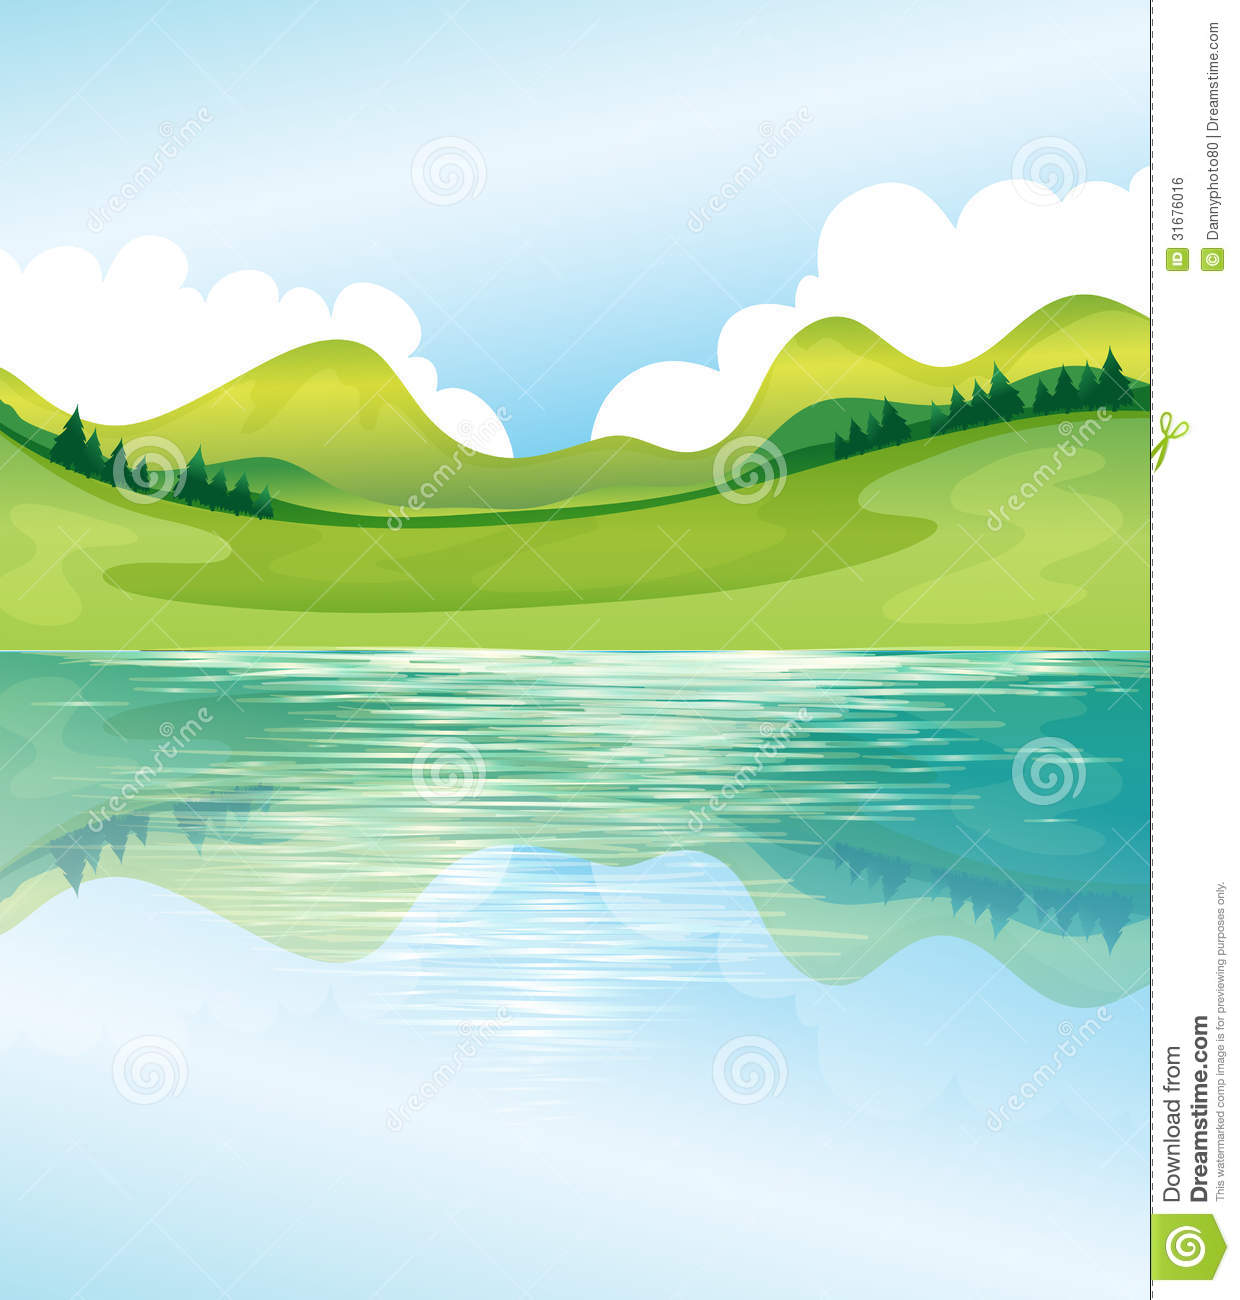 Land Clipart The Water And Land Resources